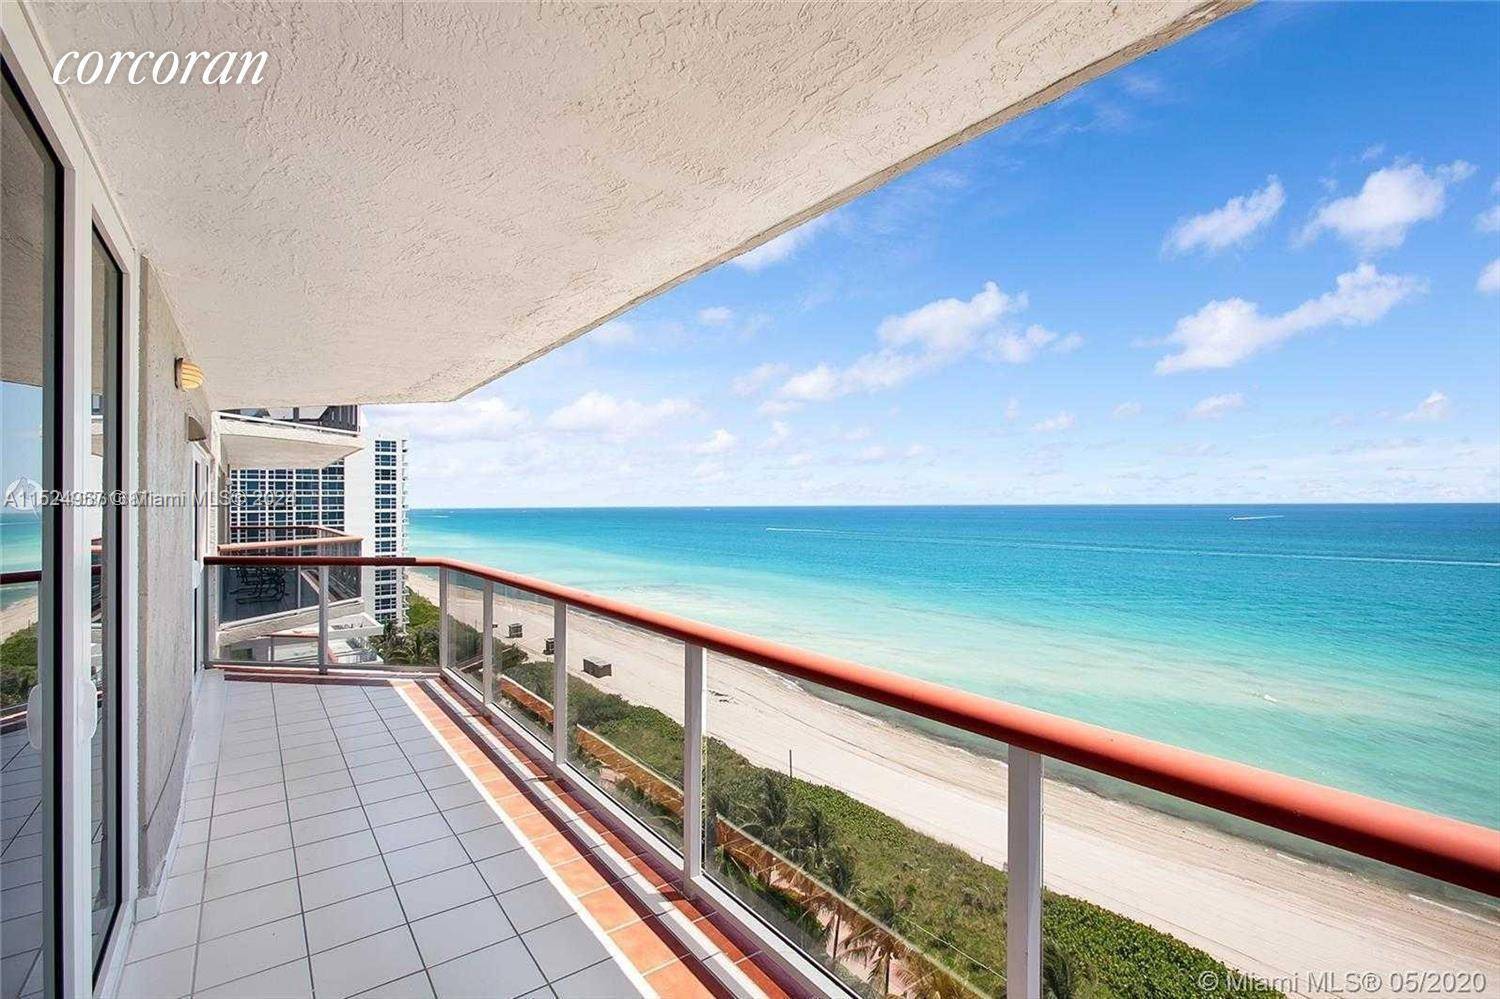 Spacious 2 Bed 2 Bath condo with direct ocean view from every room.